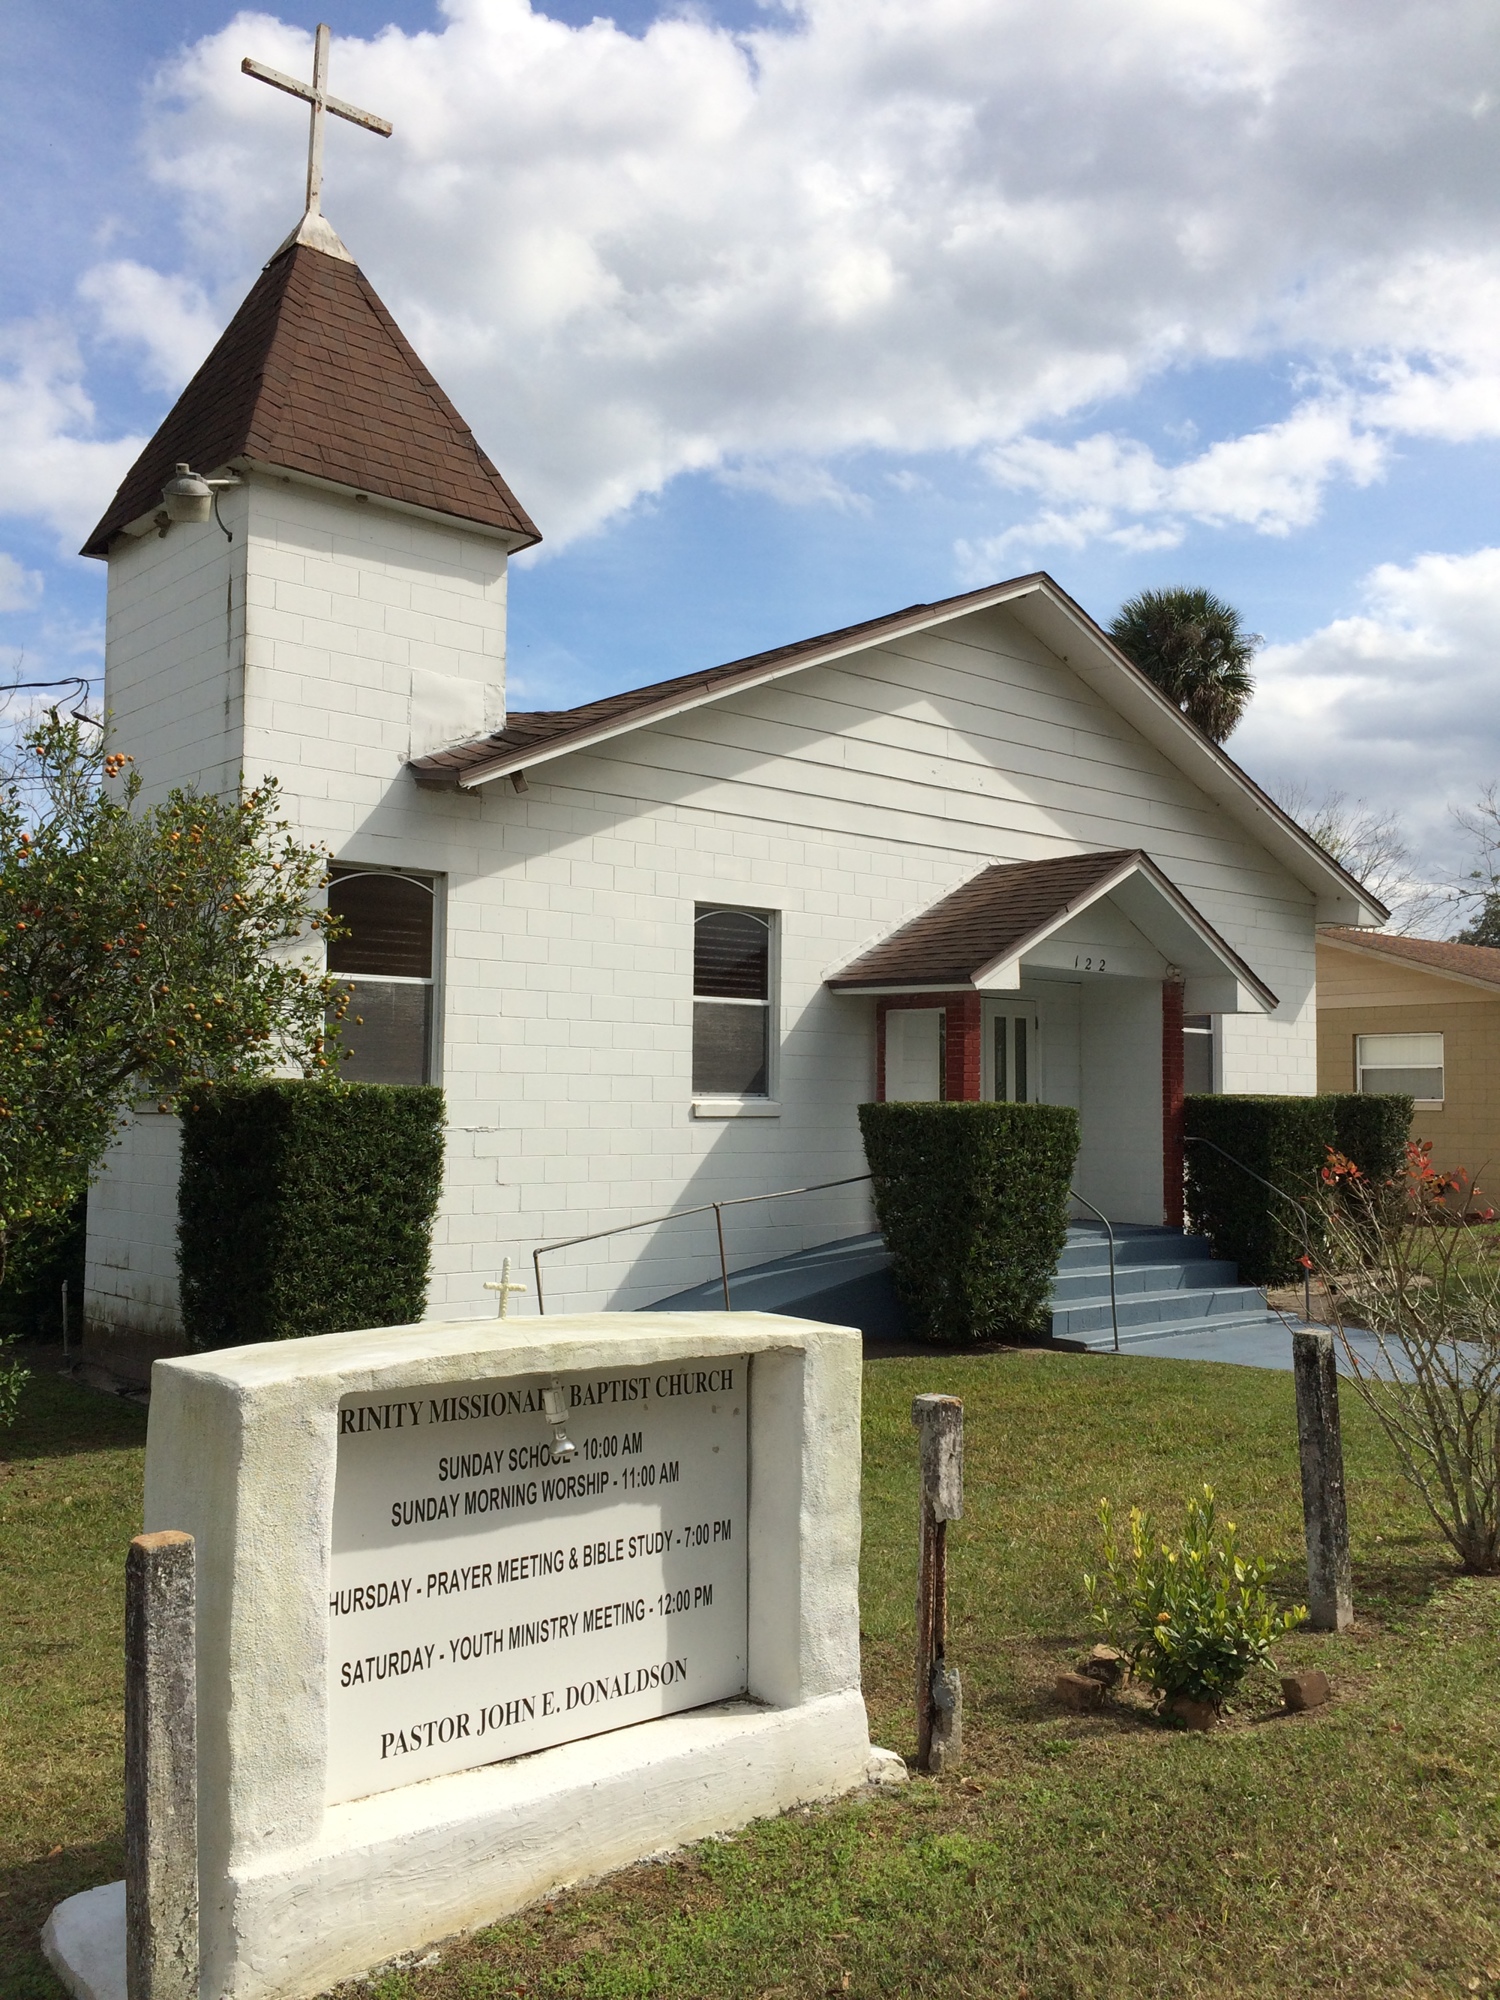 Trinity Missionary Baptist Church, in Oakland, was built on Jefferson Street in 1950 during a time when segregation forced black congregations to worship separately from the white churches.